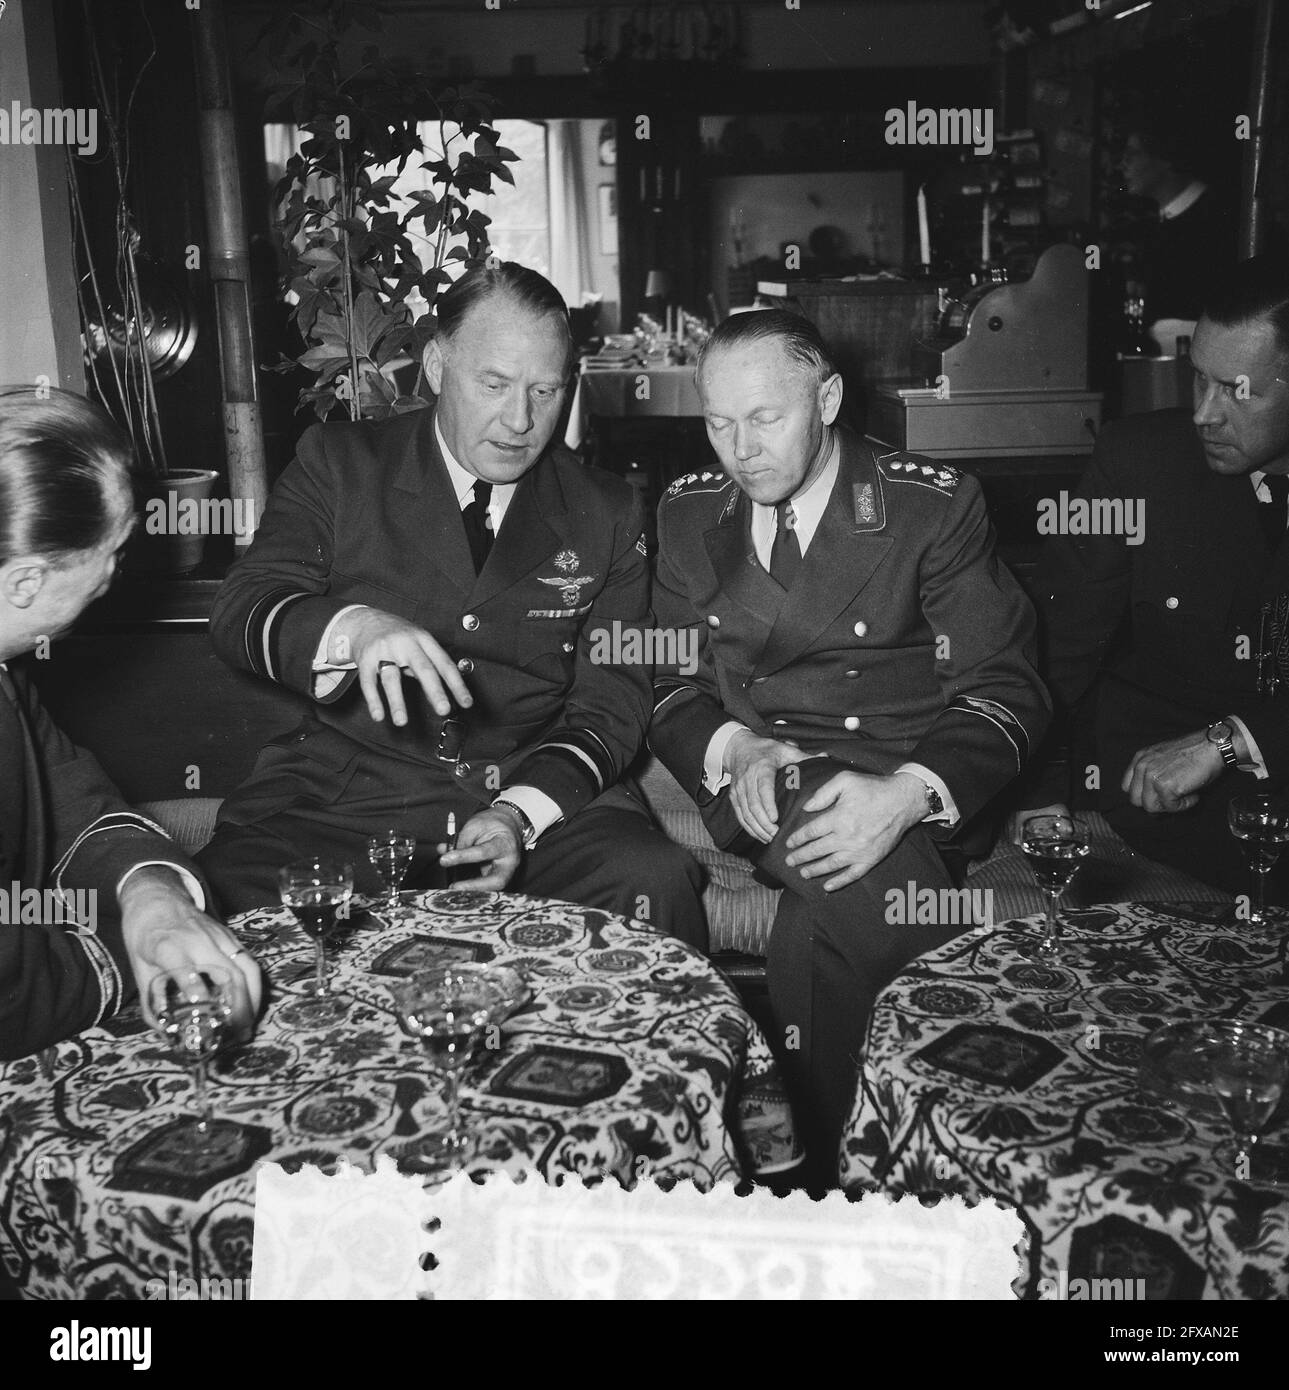 German Air Force General J. Kammhuber in our country (played an important role in the German night fighter units during World War II), February 27, 1957, generals, group portraits, air force, officers, second world war, The Netherlands, 20th century press agency photo, news to remember, documentary, historic photography 1945-1990, visual stories, human history of the Twentieth Century, capturing moments in time Stock Photo